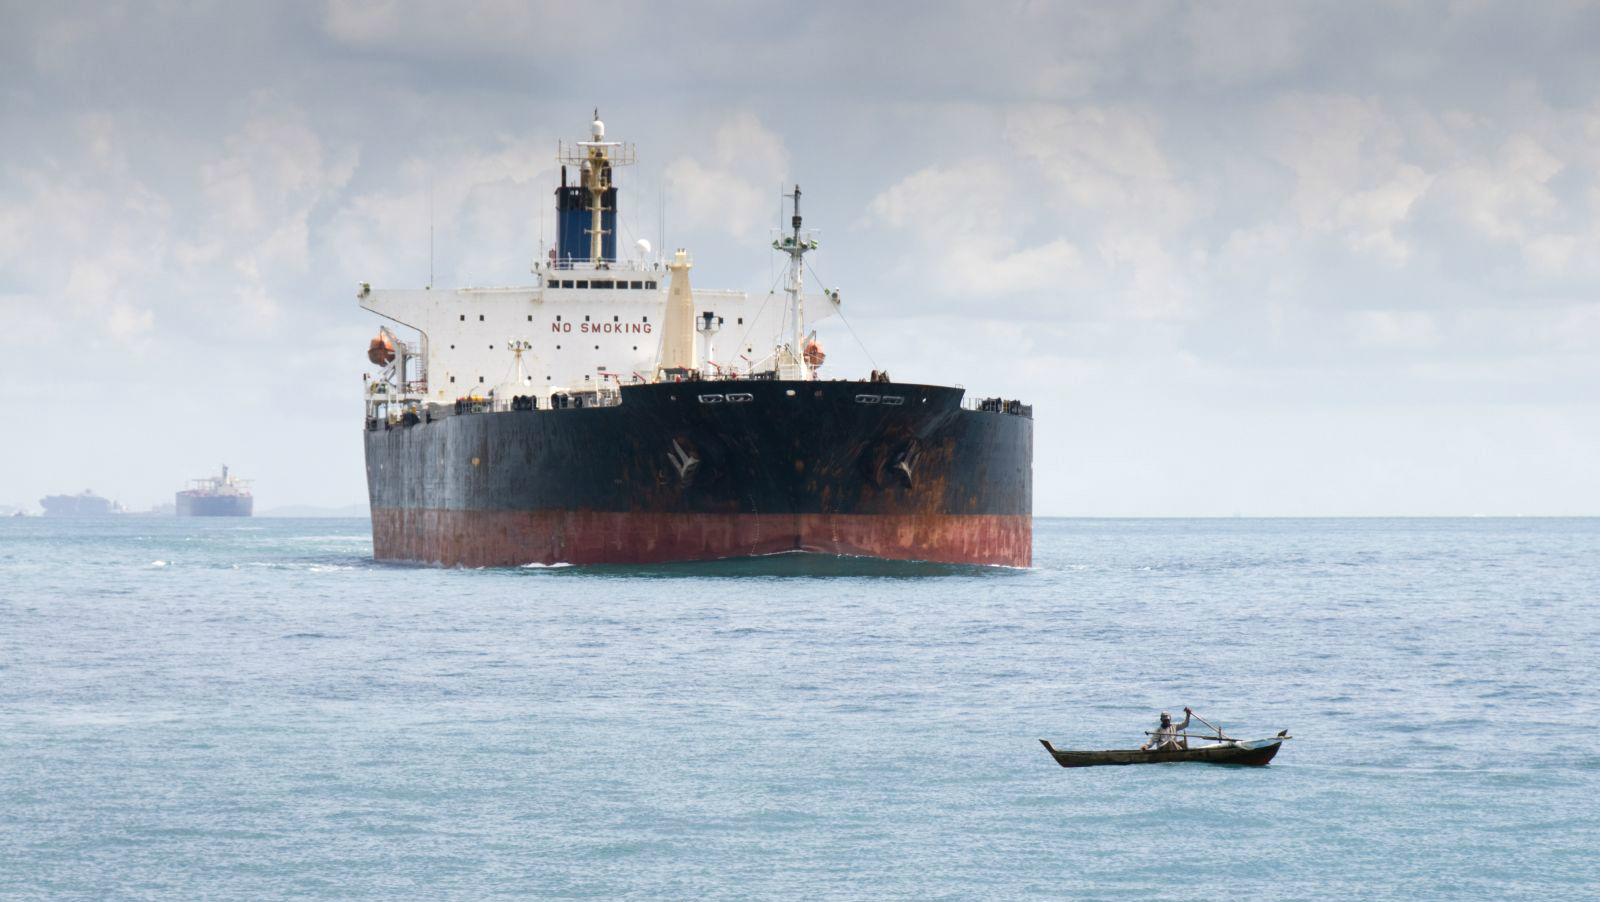 Small boat in front of tanker